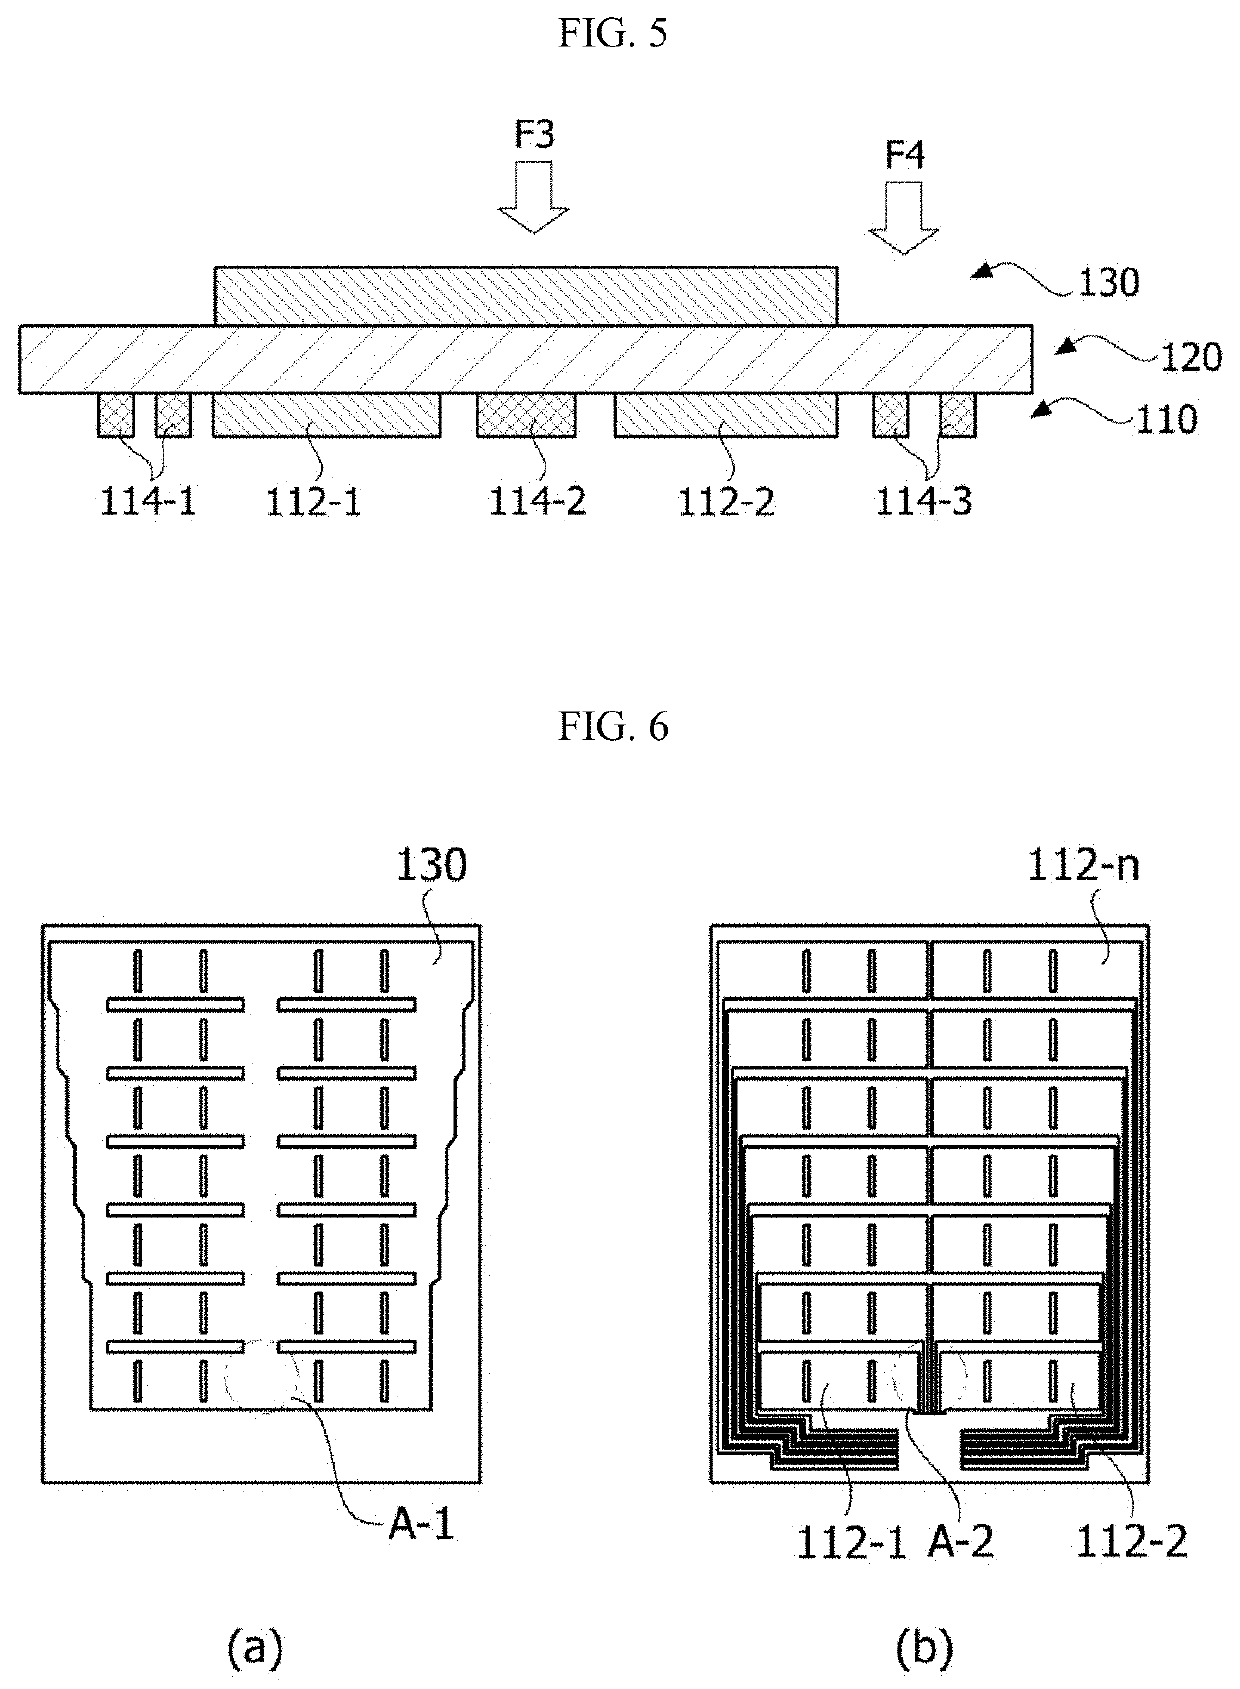 Pressure detection sensor having a plurality of dielectric layers and a plurality of electrode layers with conductive paths and wiring portions